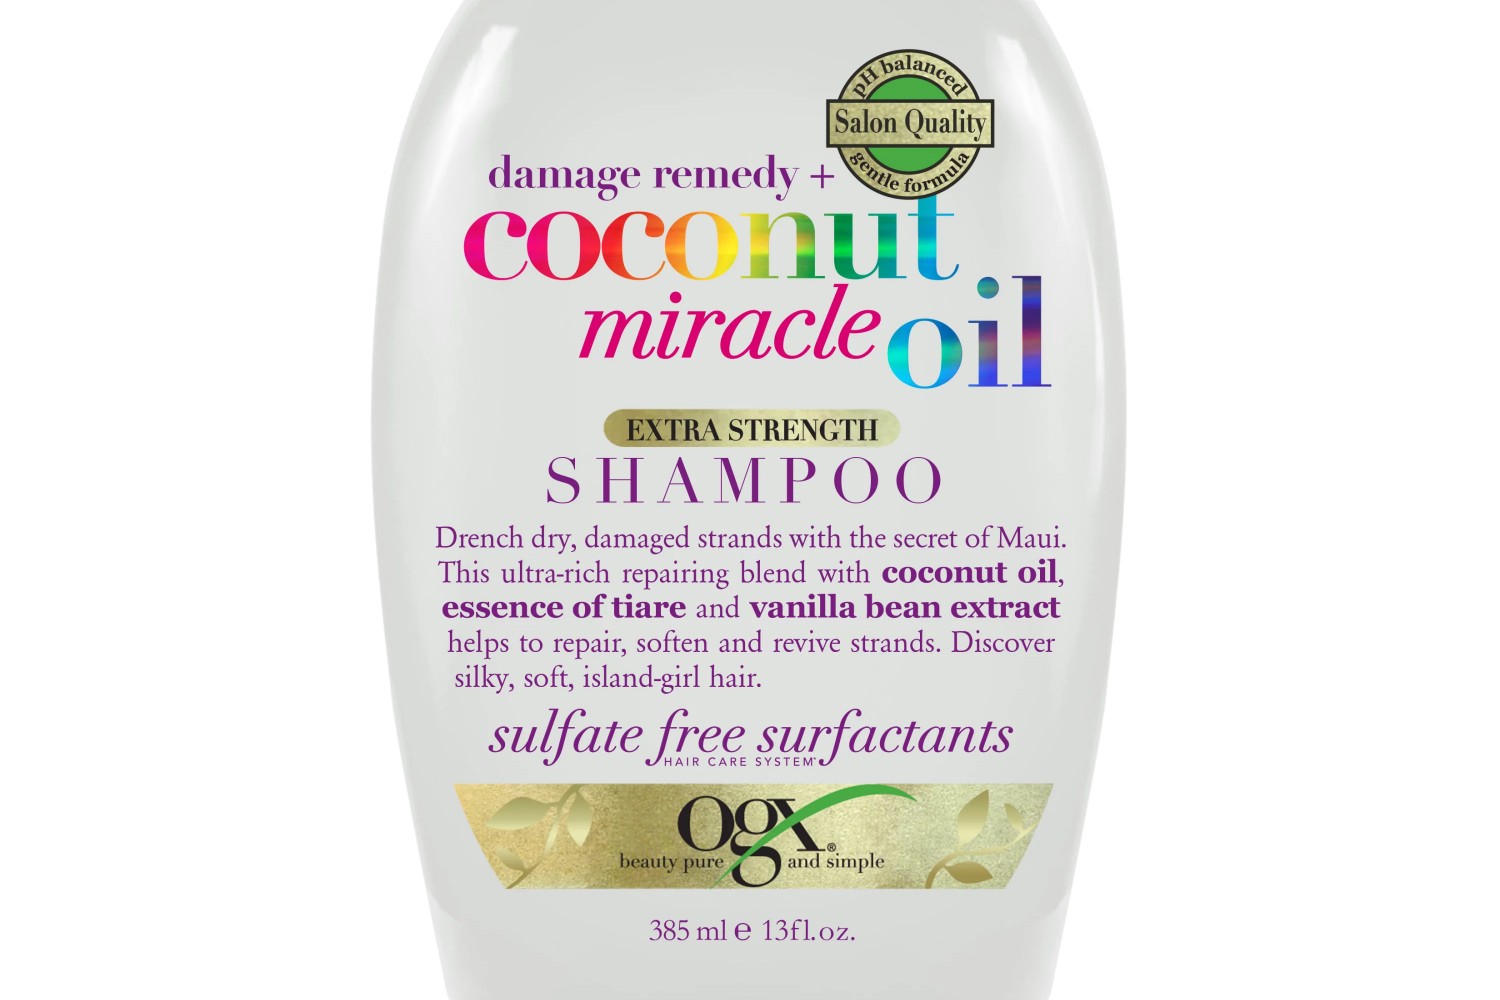 OGX Coconut Miracle Oil Shampoo - Shop Shampoo & Conditioner at H-E-B